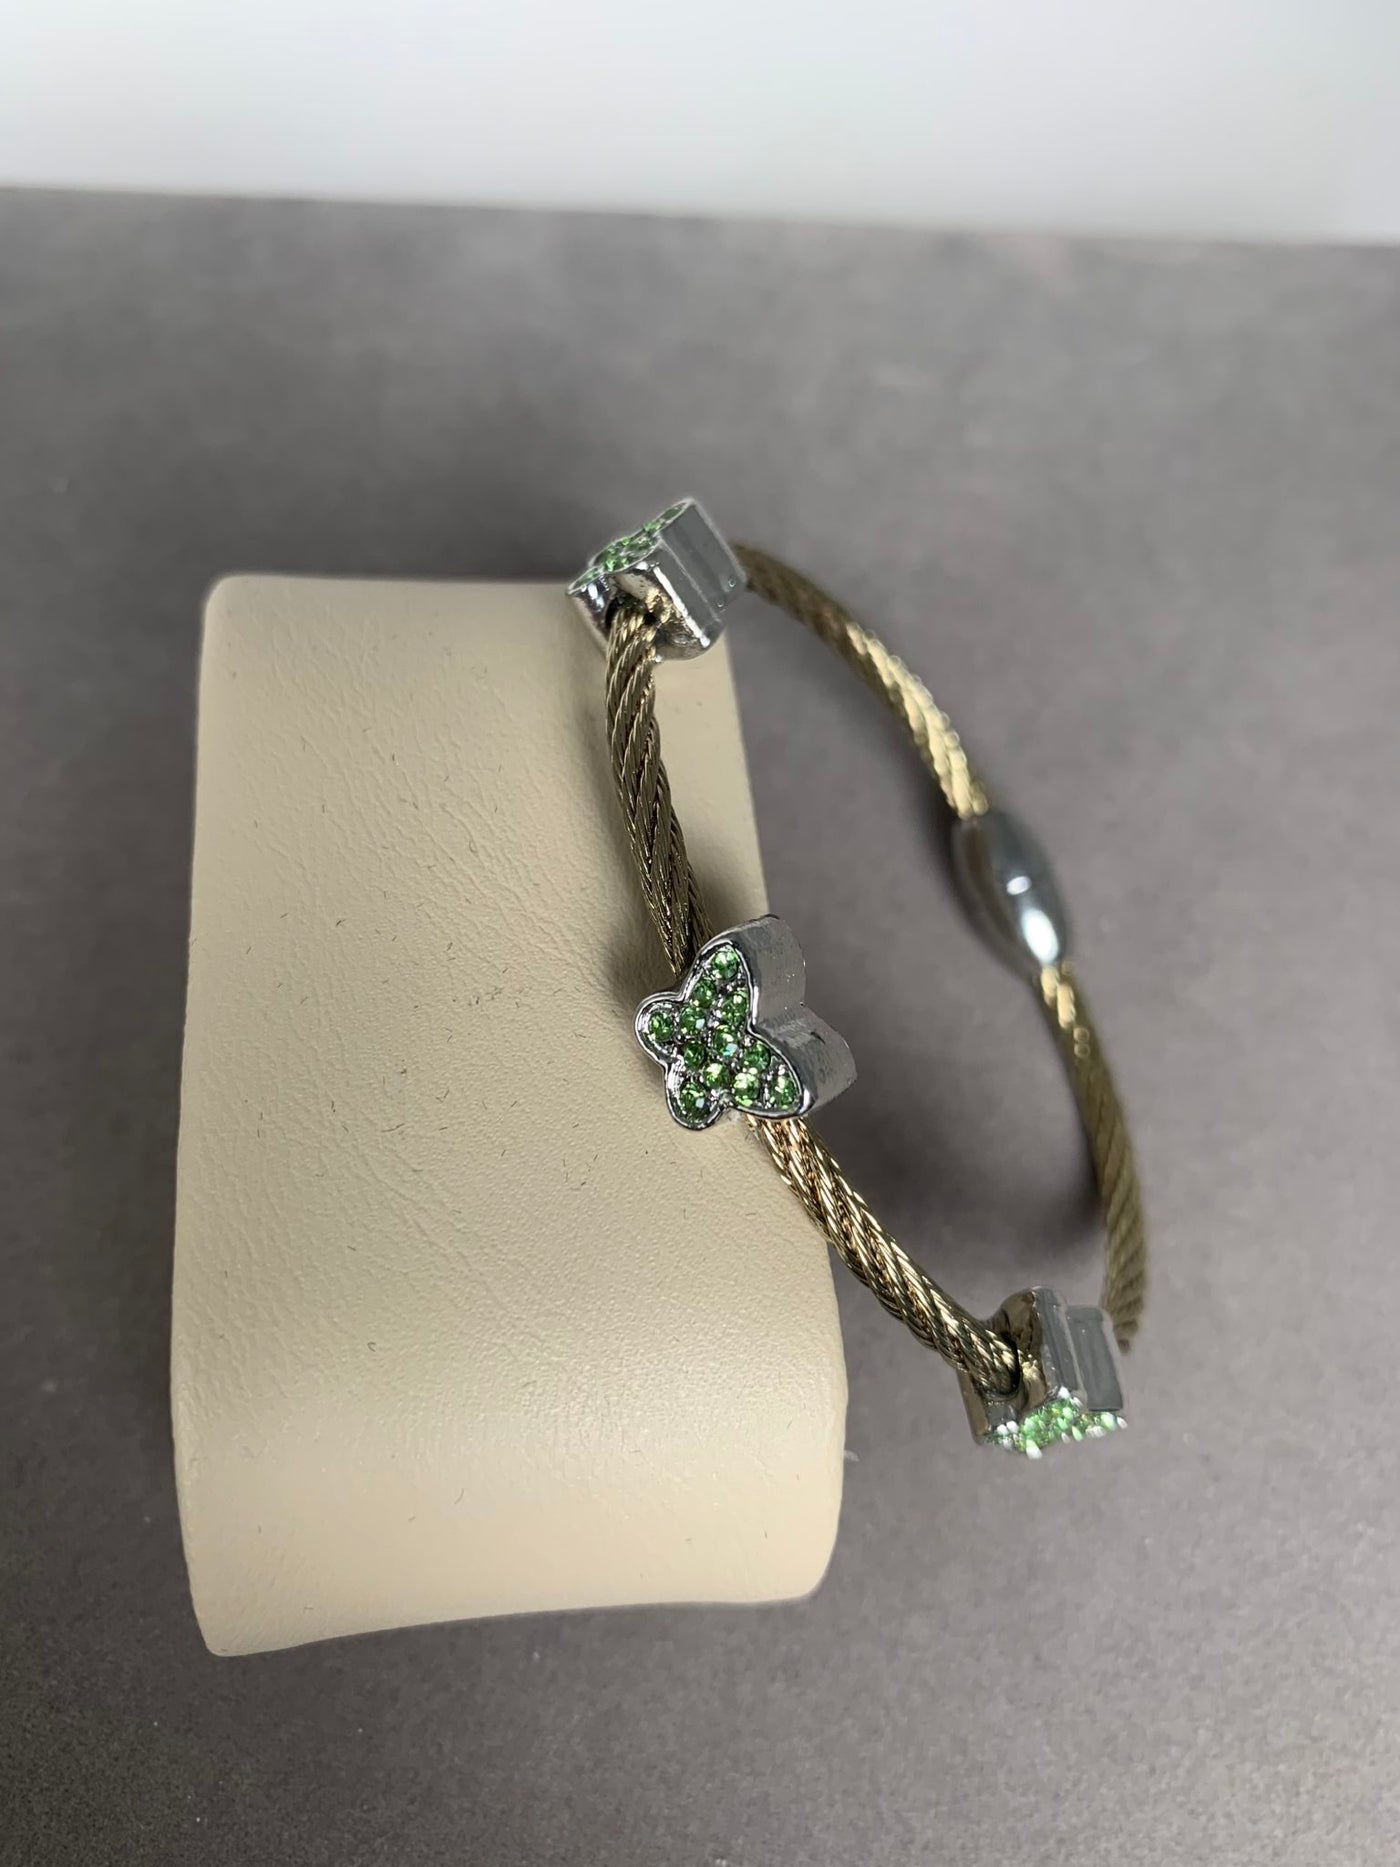 Yellow Gold Tone Wire Bangle Bracelet with 3 Green Pave Crystal Motifs